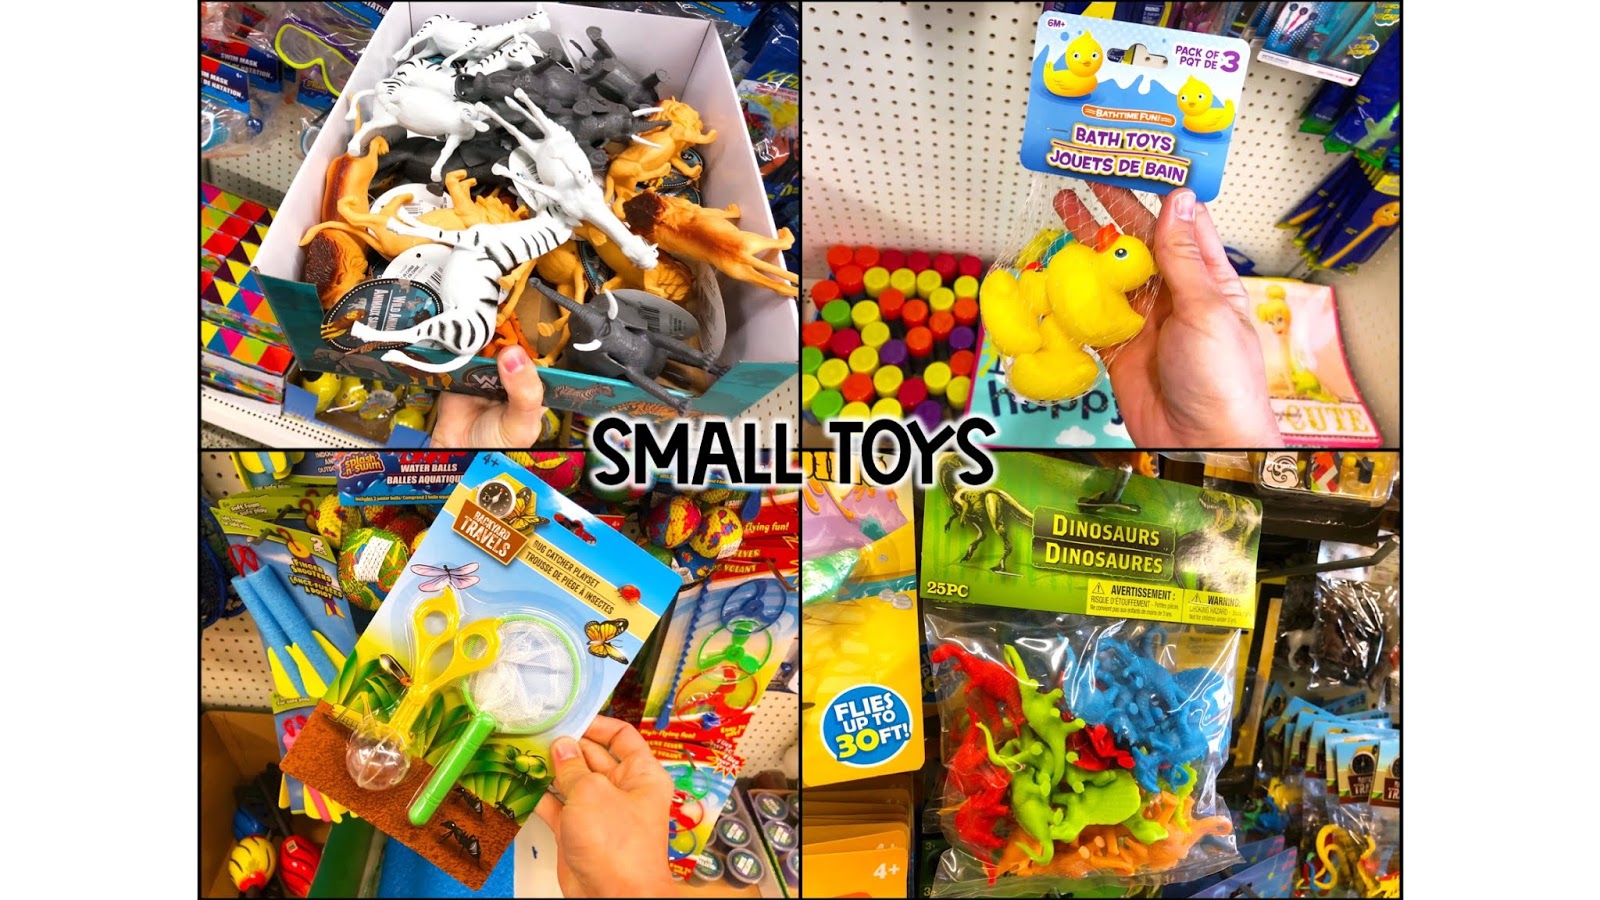 Find the Best Sensory Play Items at the Dollar Store